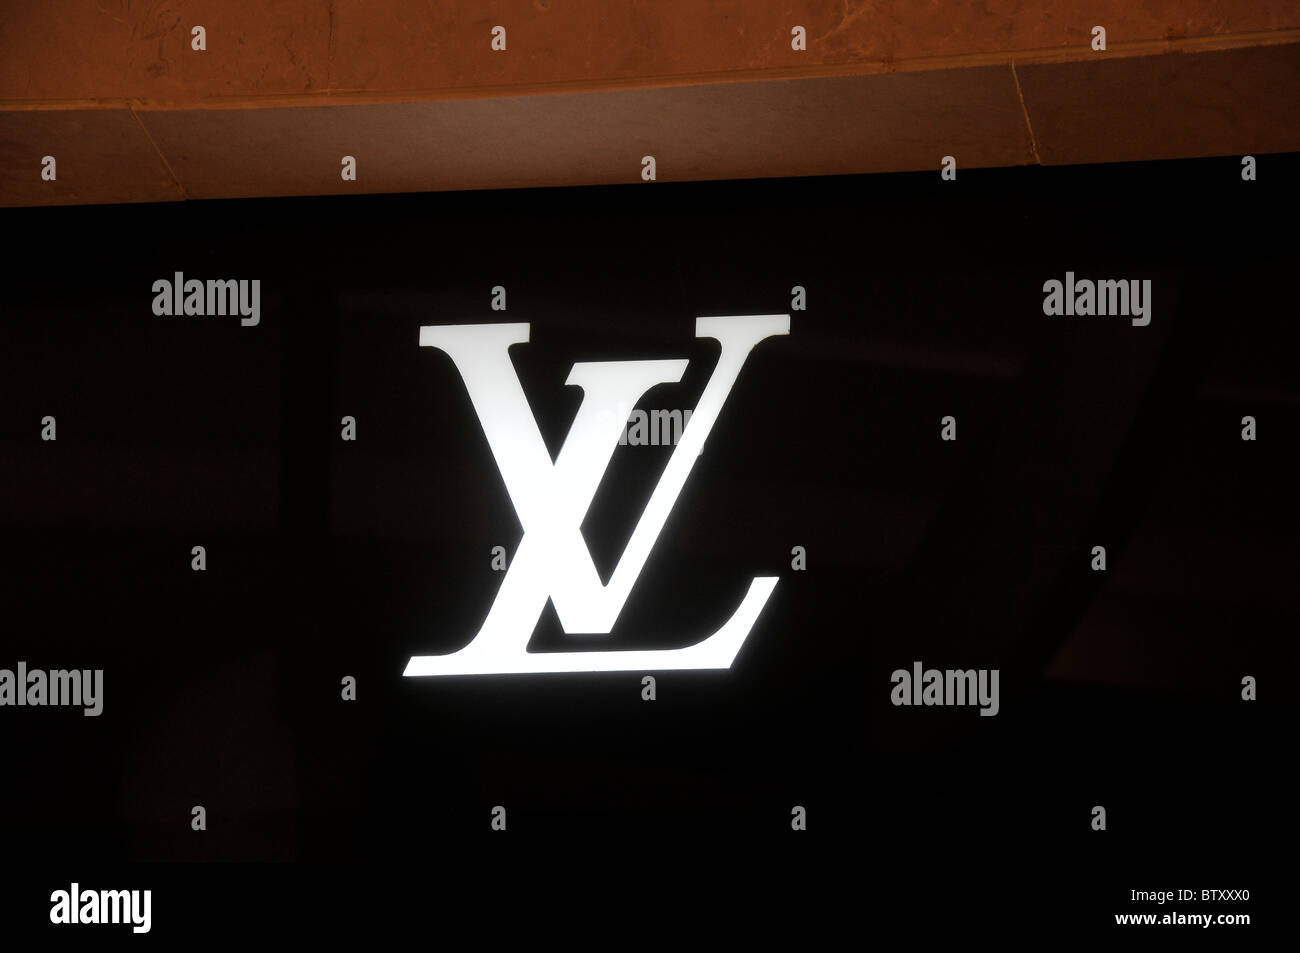 Logo louis vuitton hi-res stock photography and images - Alamy